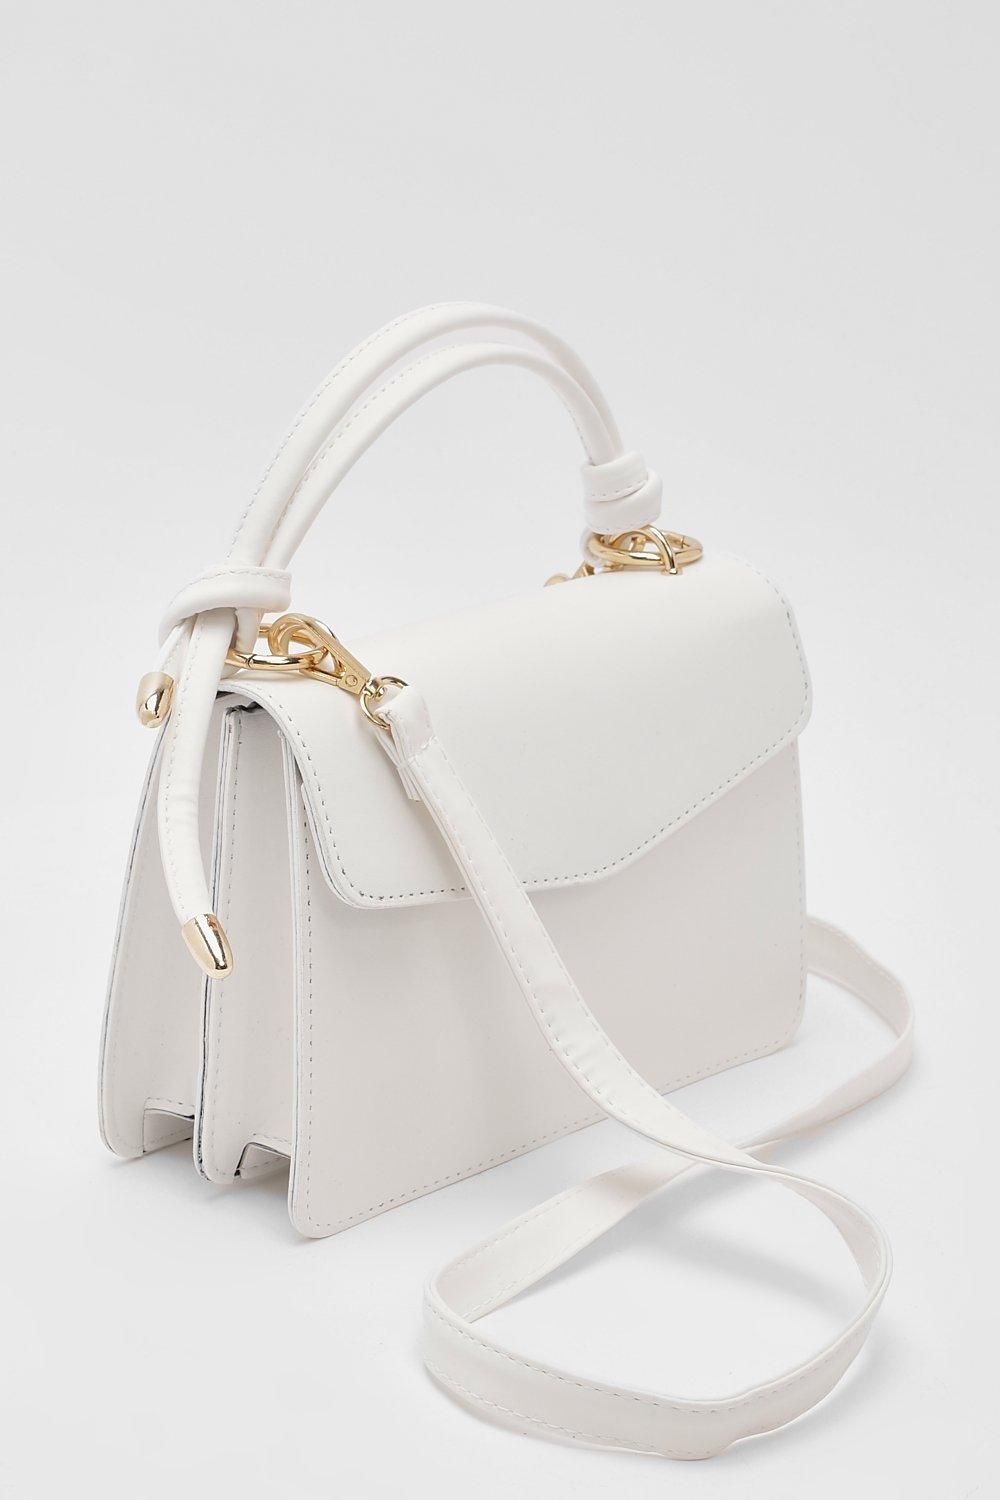 Add stylish white handbags to your
fashion collection